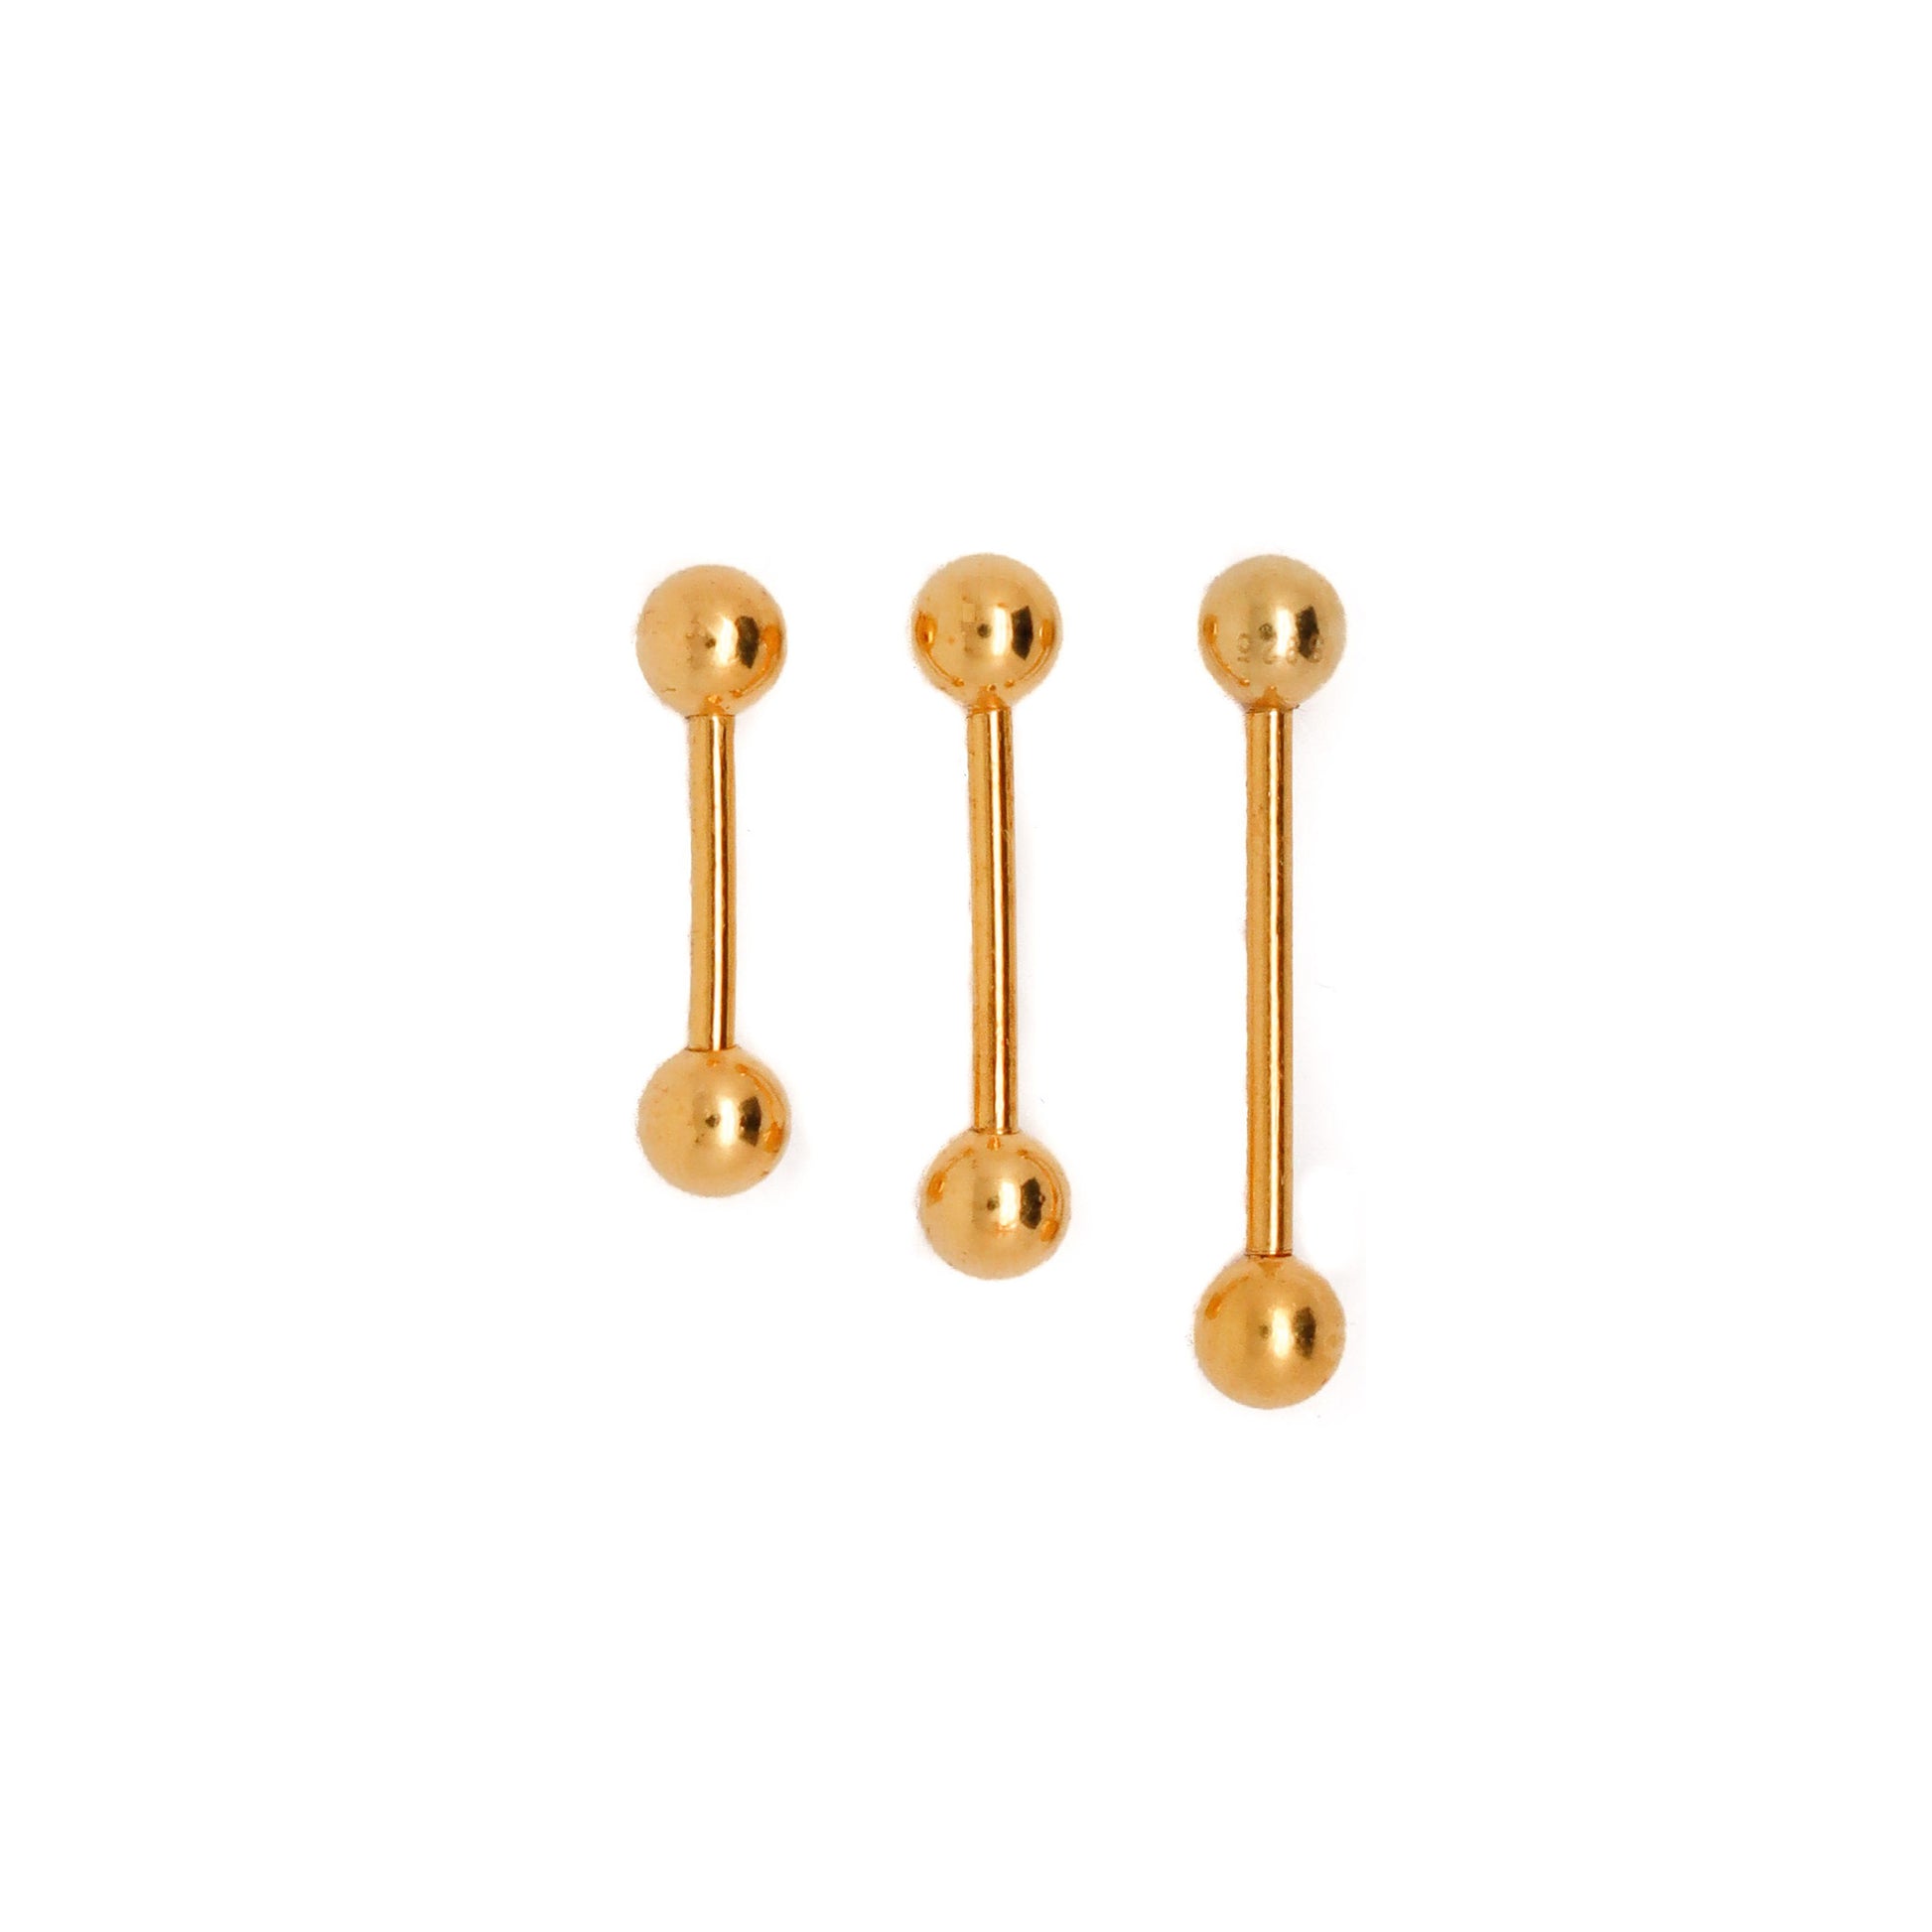 Vermeil | 24k Gold Coated 925 Silver 16G 4mm Double Ball Straight Barbell Nipple Ring | 10mm 3/8" 12mm 1/2" 14mm 9/16" - Sturdy South